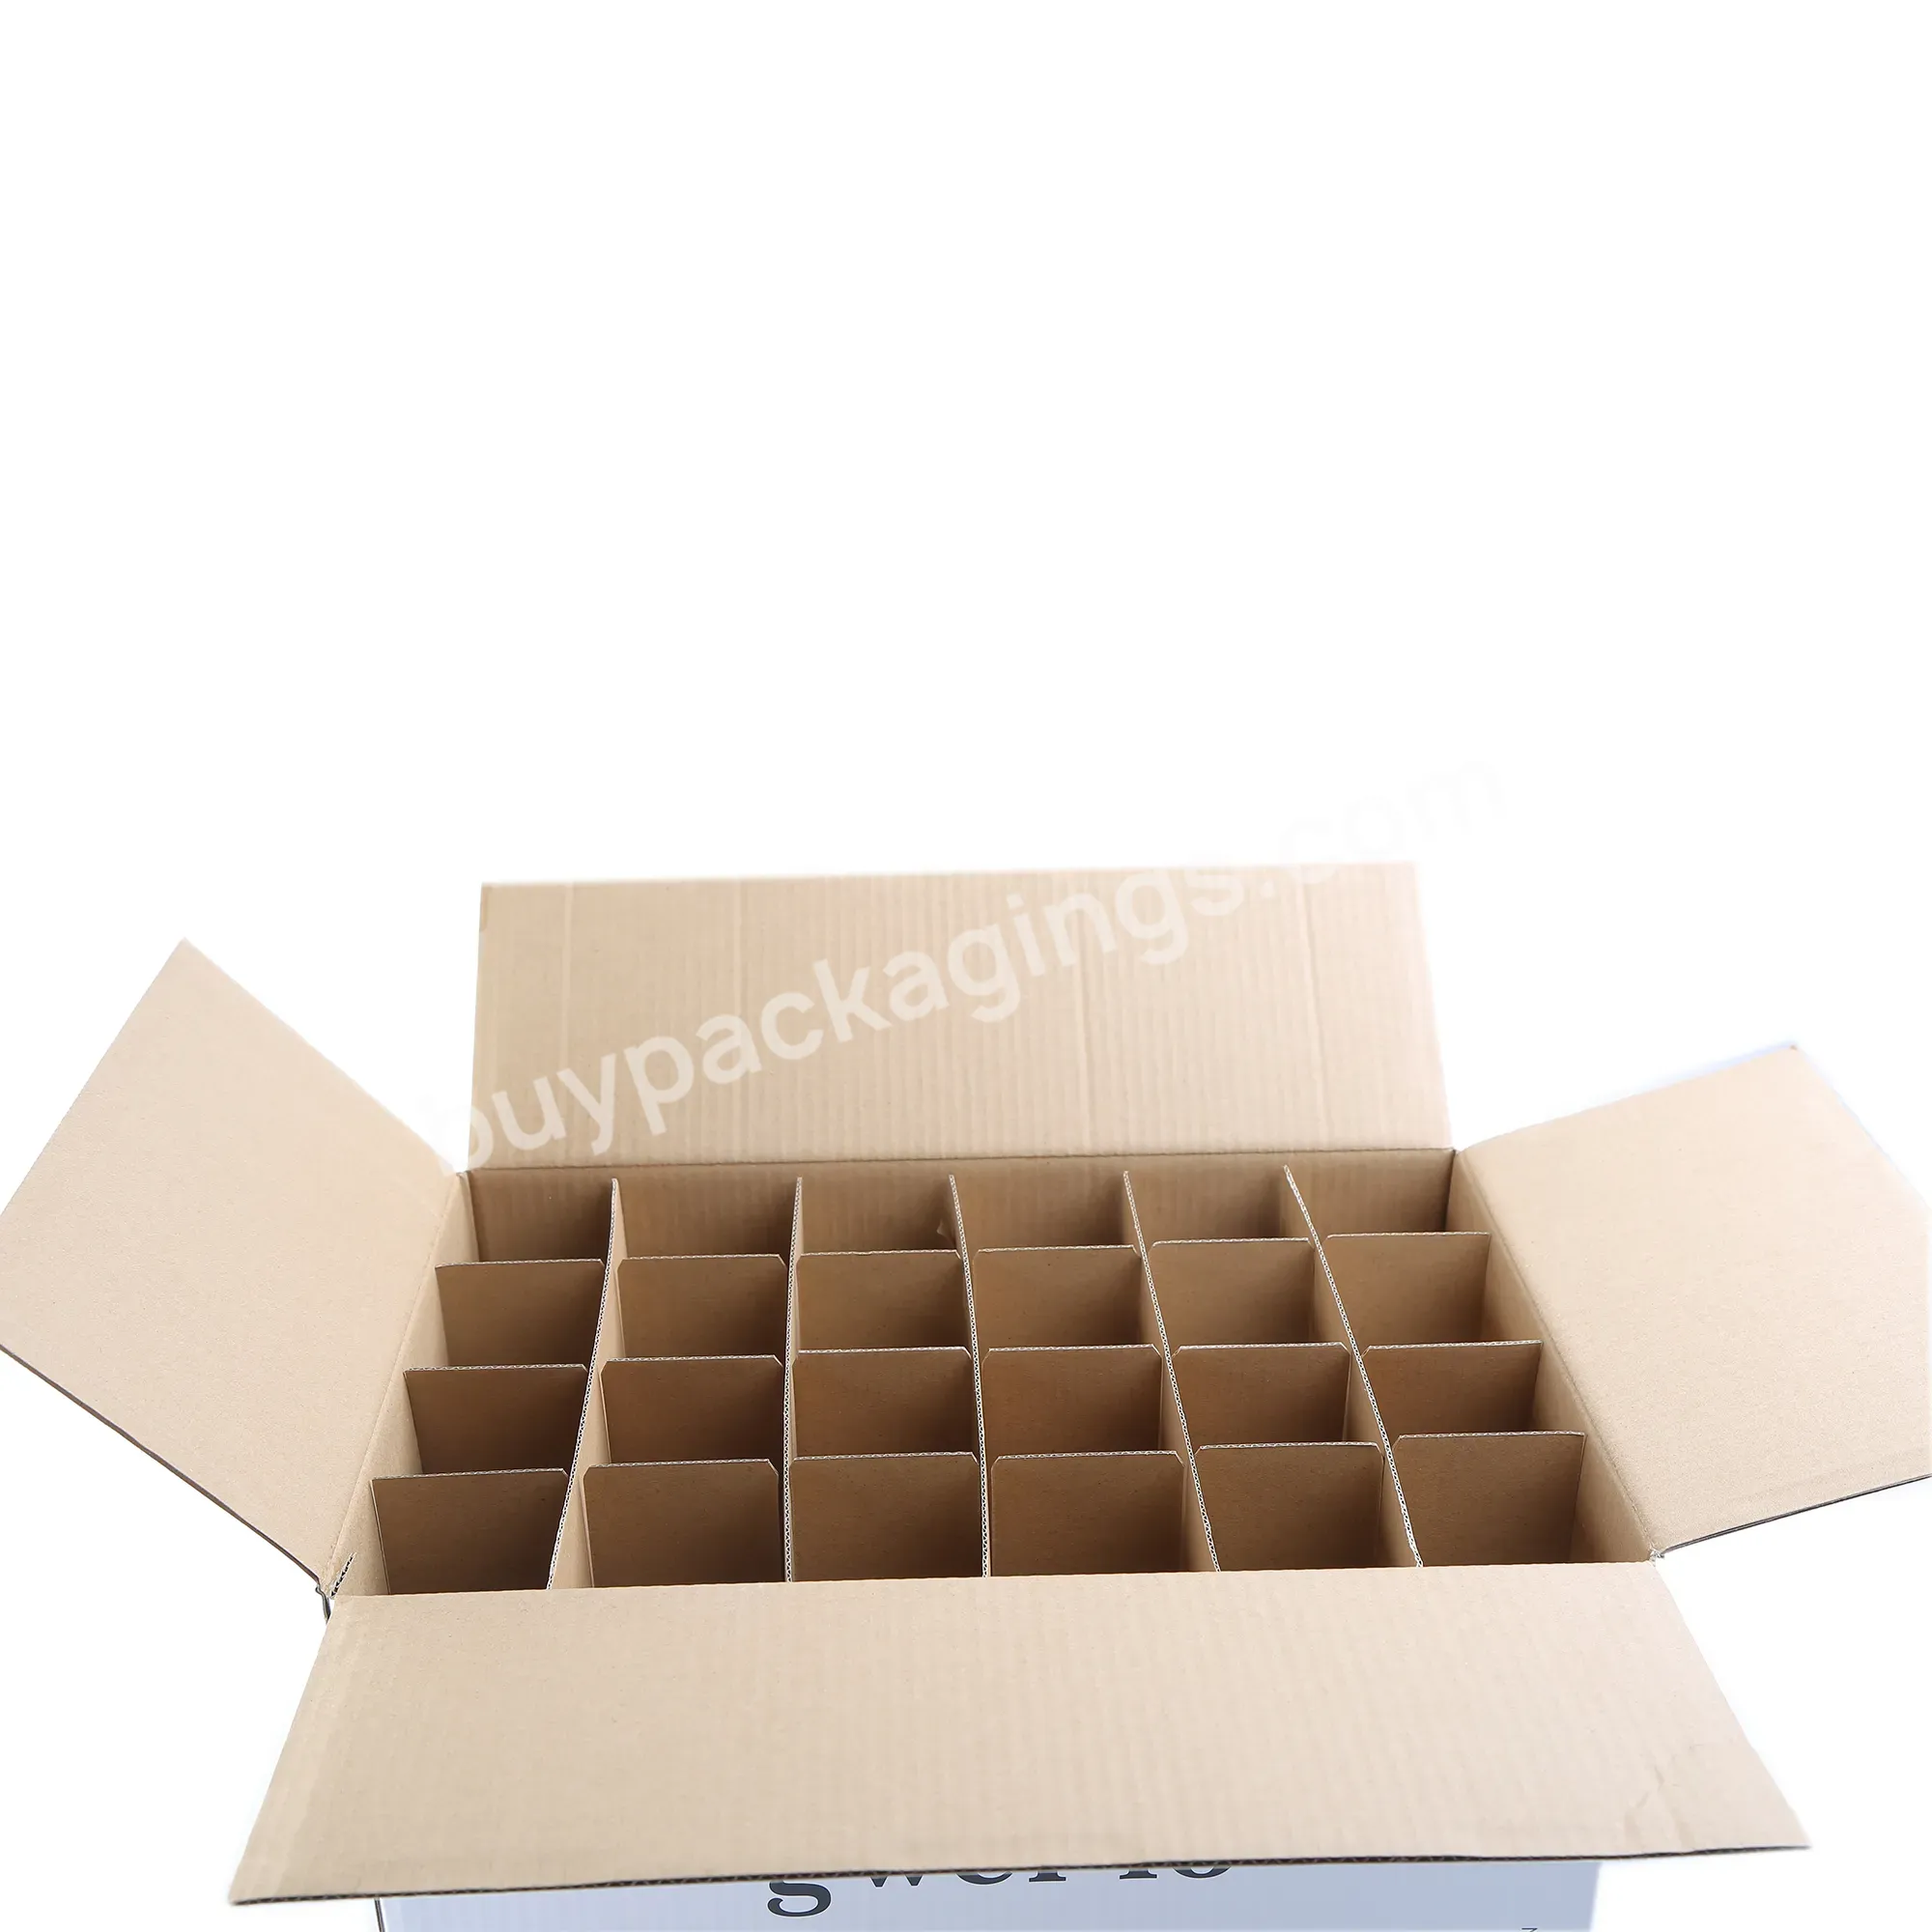 Oem Factory Custom Sturdy Cardboard Corrugated Wine Shipping Packaging Wine Shippers Boxes - Buy Wine Shippers Boxes,Cardboard Corrugated Wine Shipping Packaging,Oem Factory Custom Sturdy Wine Shippers Boxes.